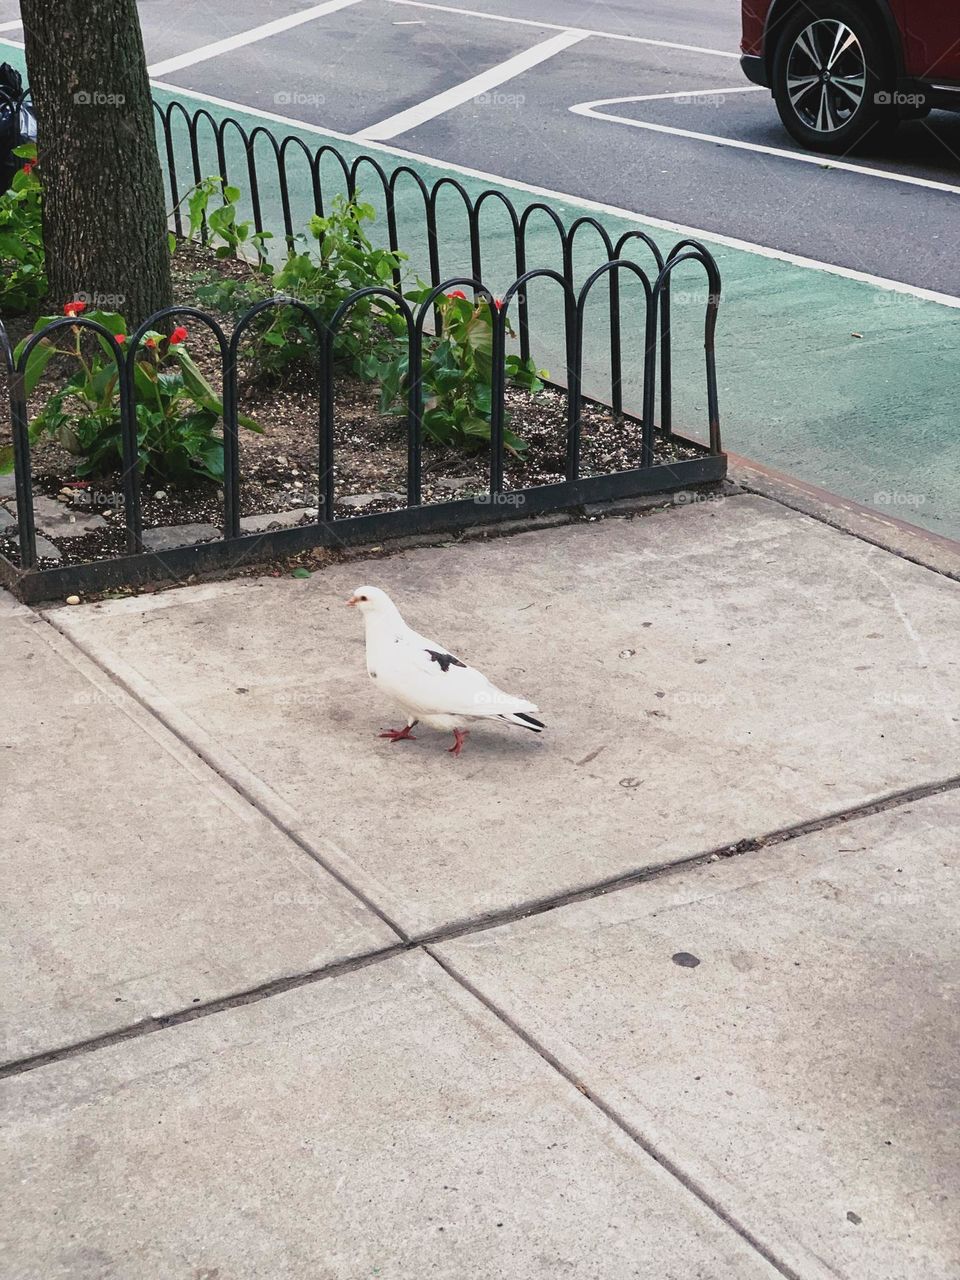 White pigeon walking on the pavement.